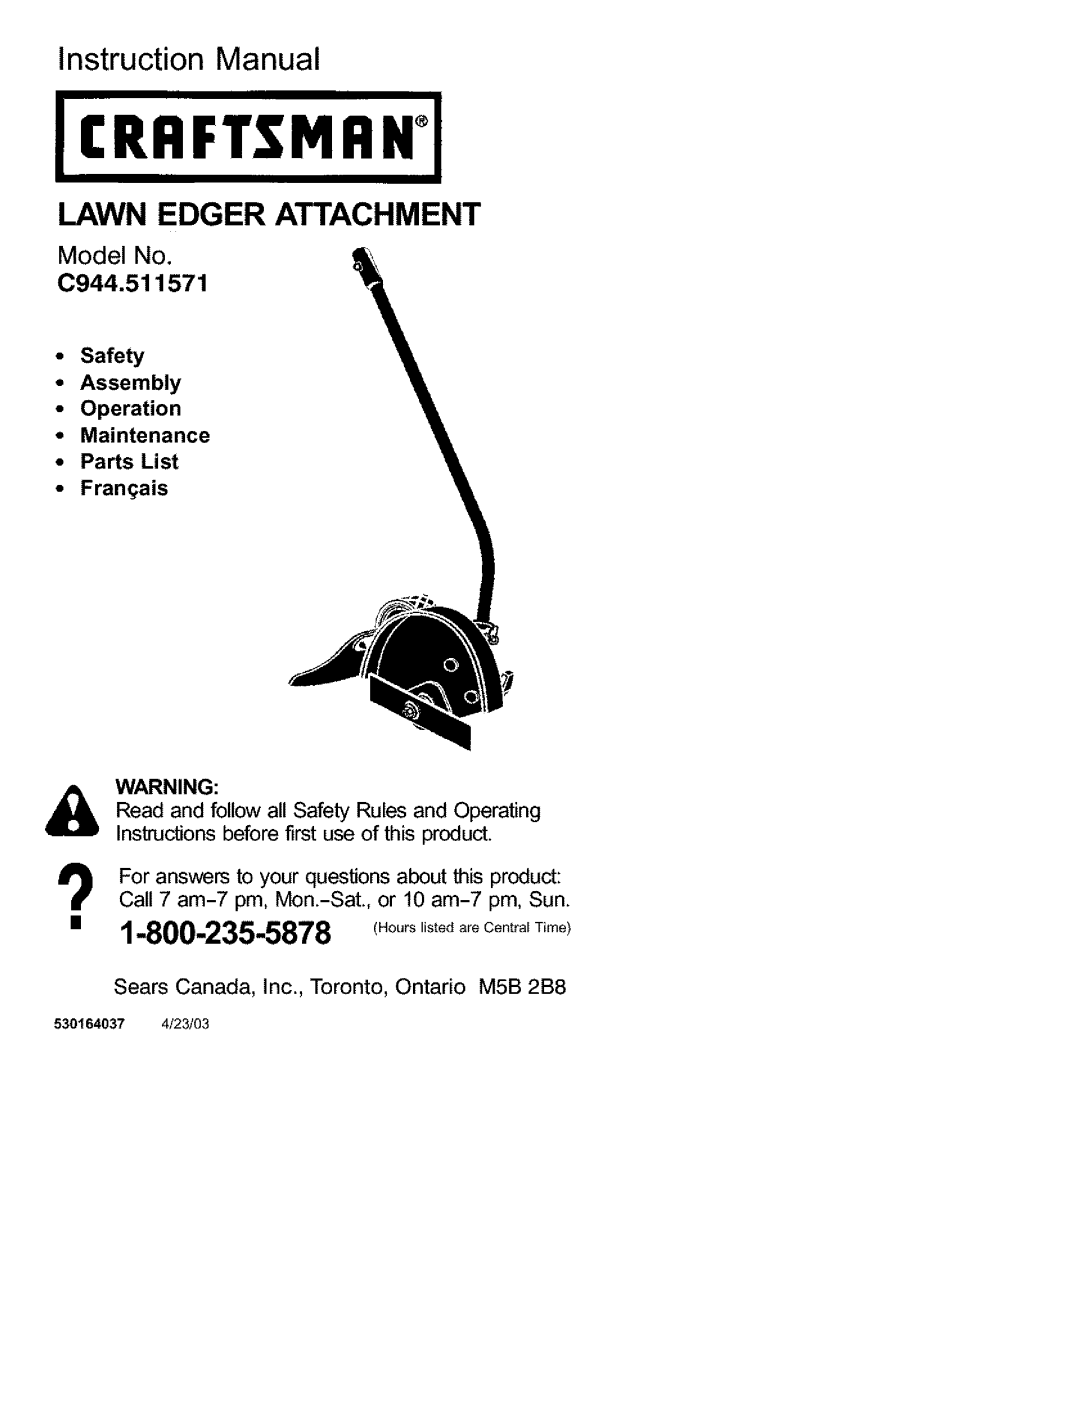 Craftsman manual Lawn Edger Attachment, Model No C944.511571, Safety Assembly Operation Maintenance 